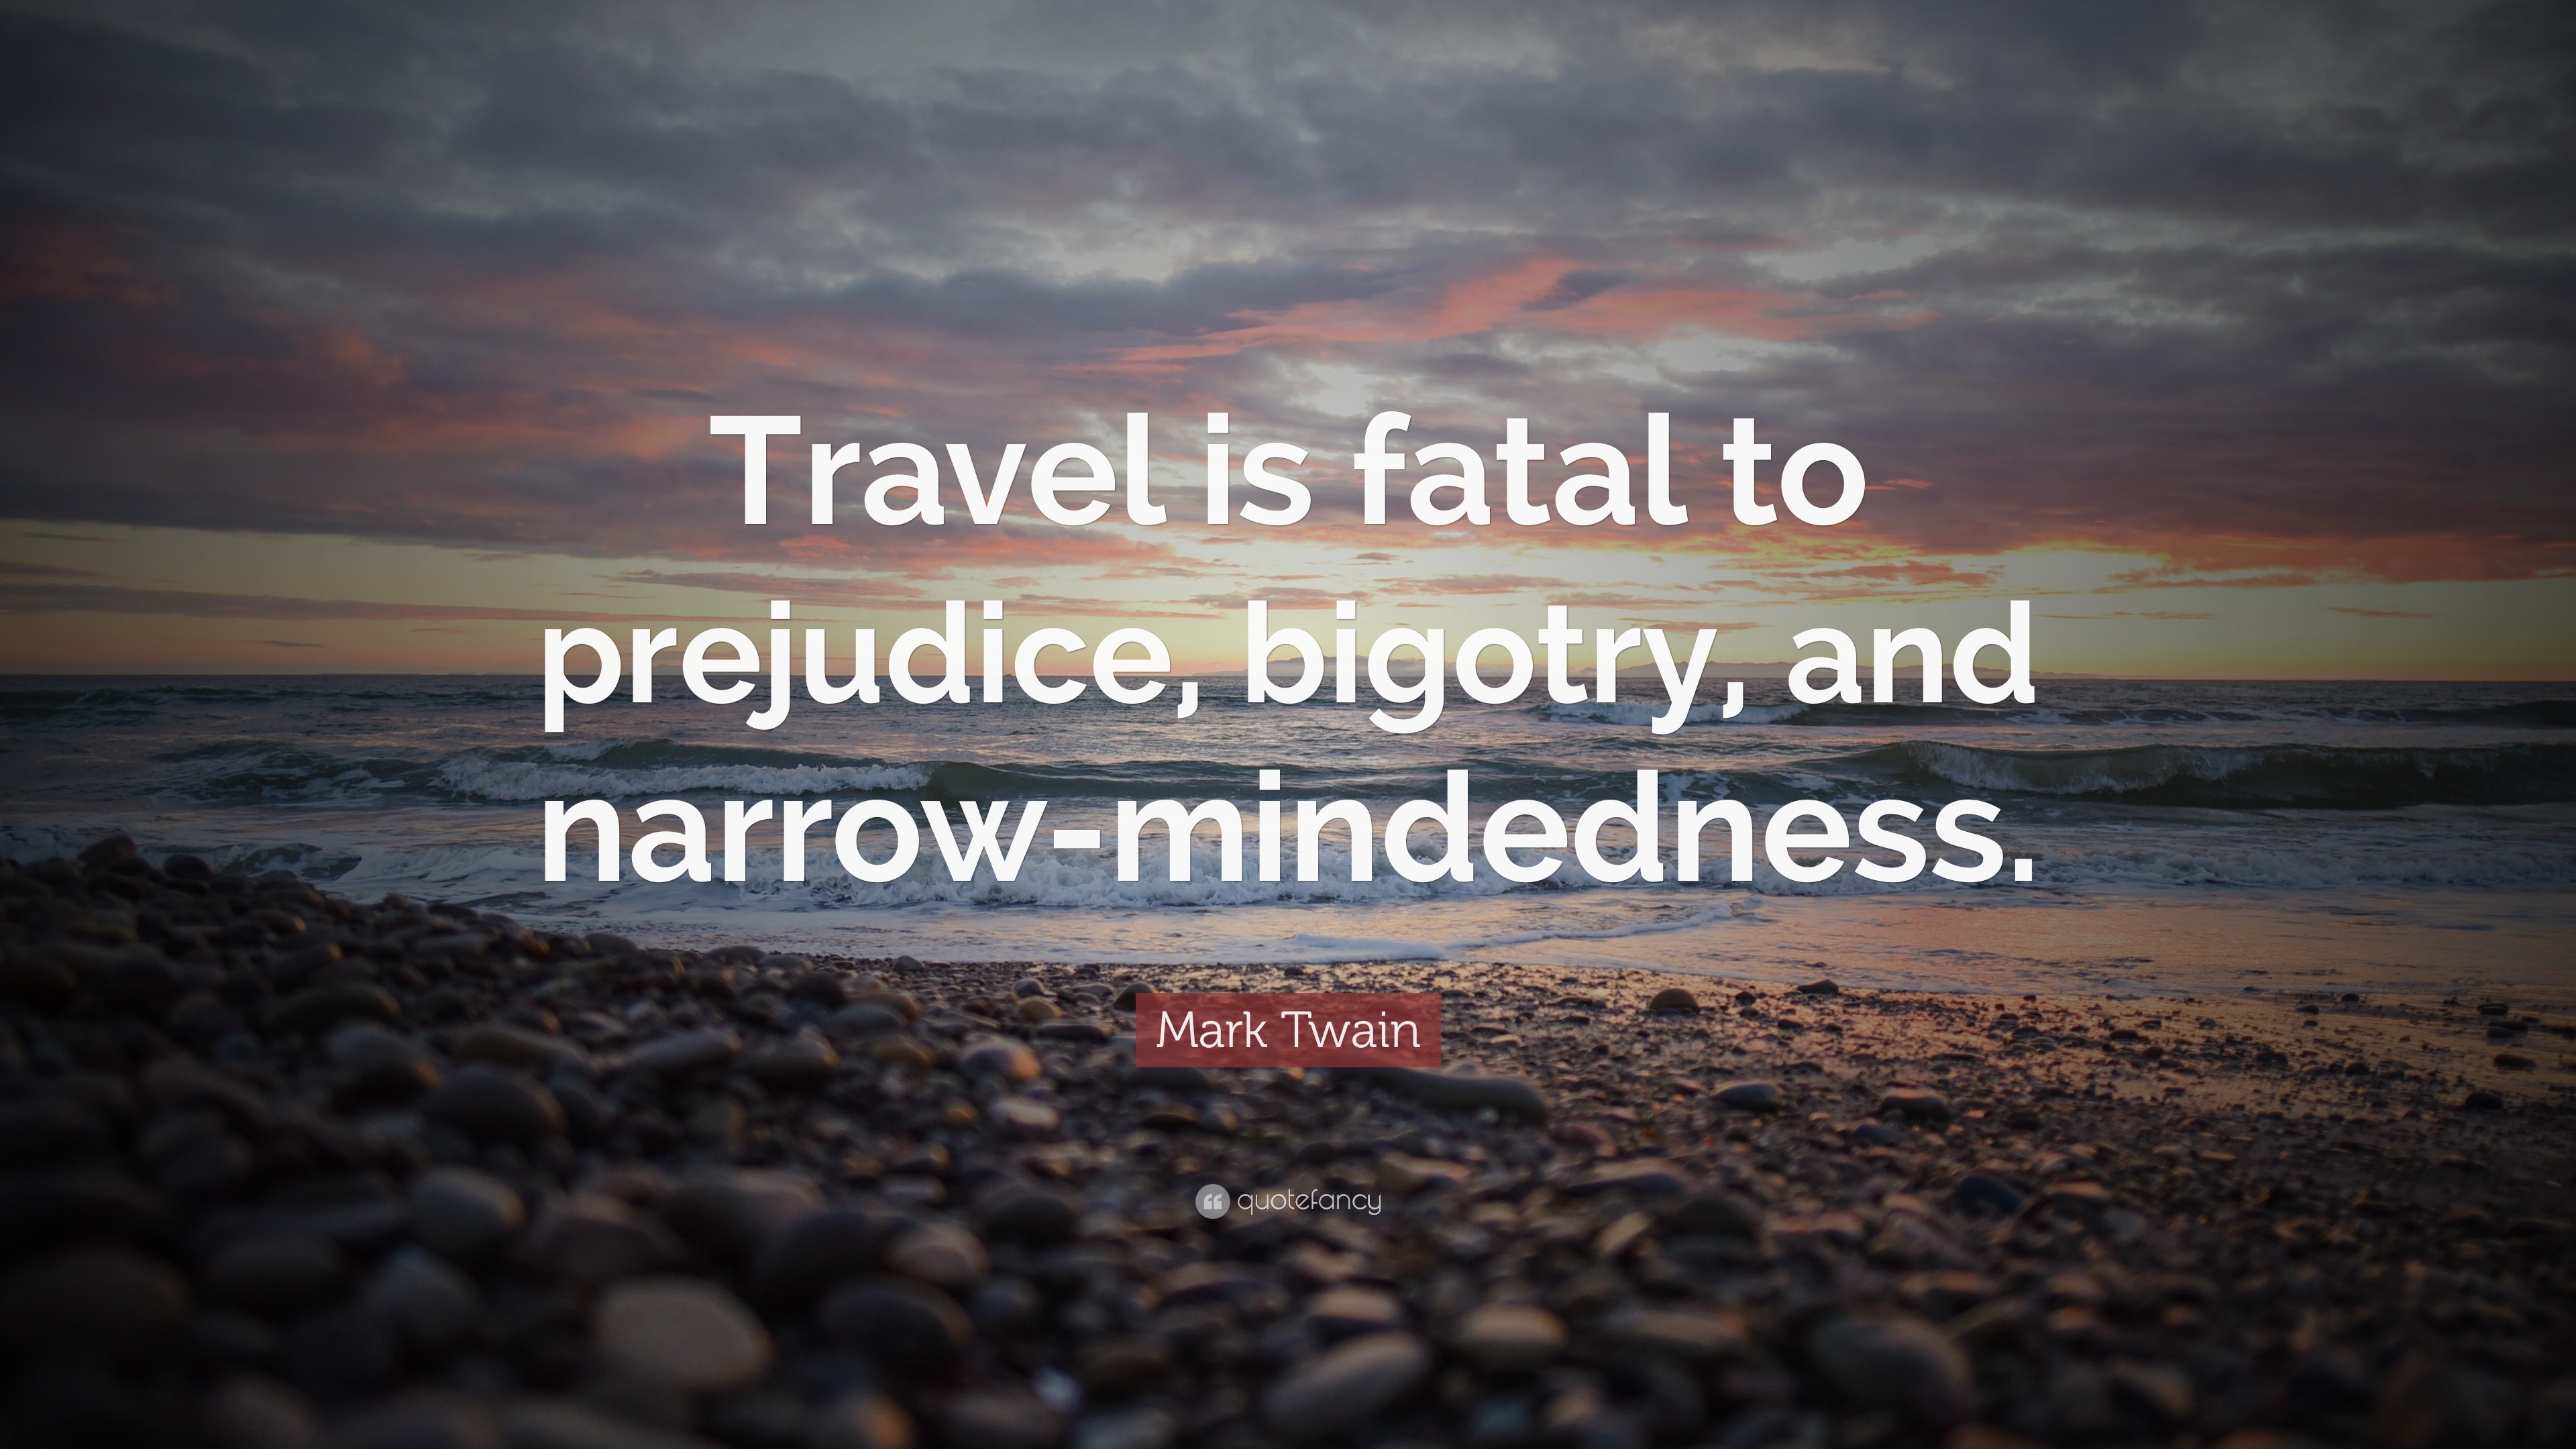 Mark Twain Quote: “Travel is fatal to prejudice, bigotry, and narrow